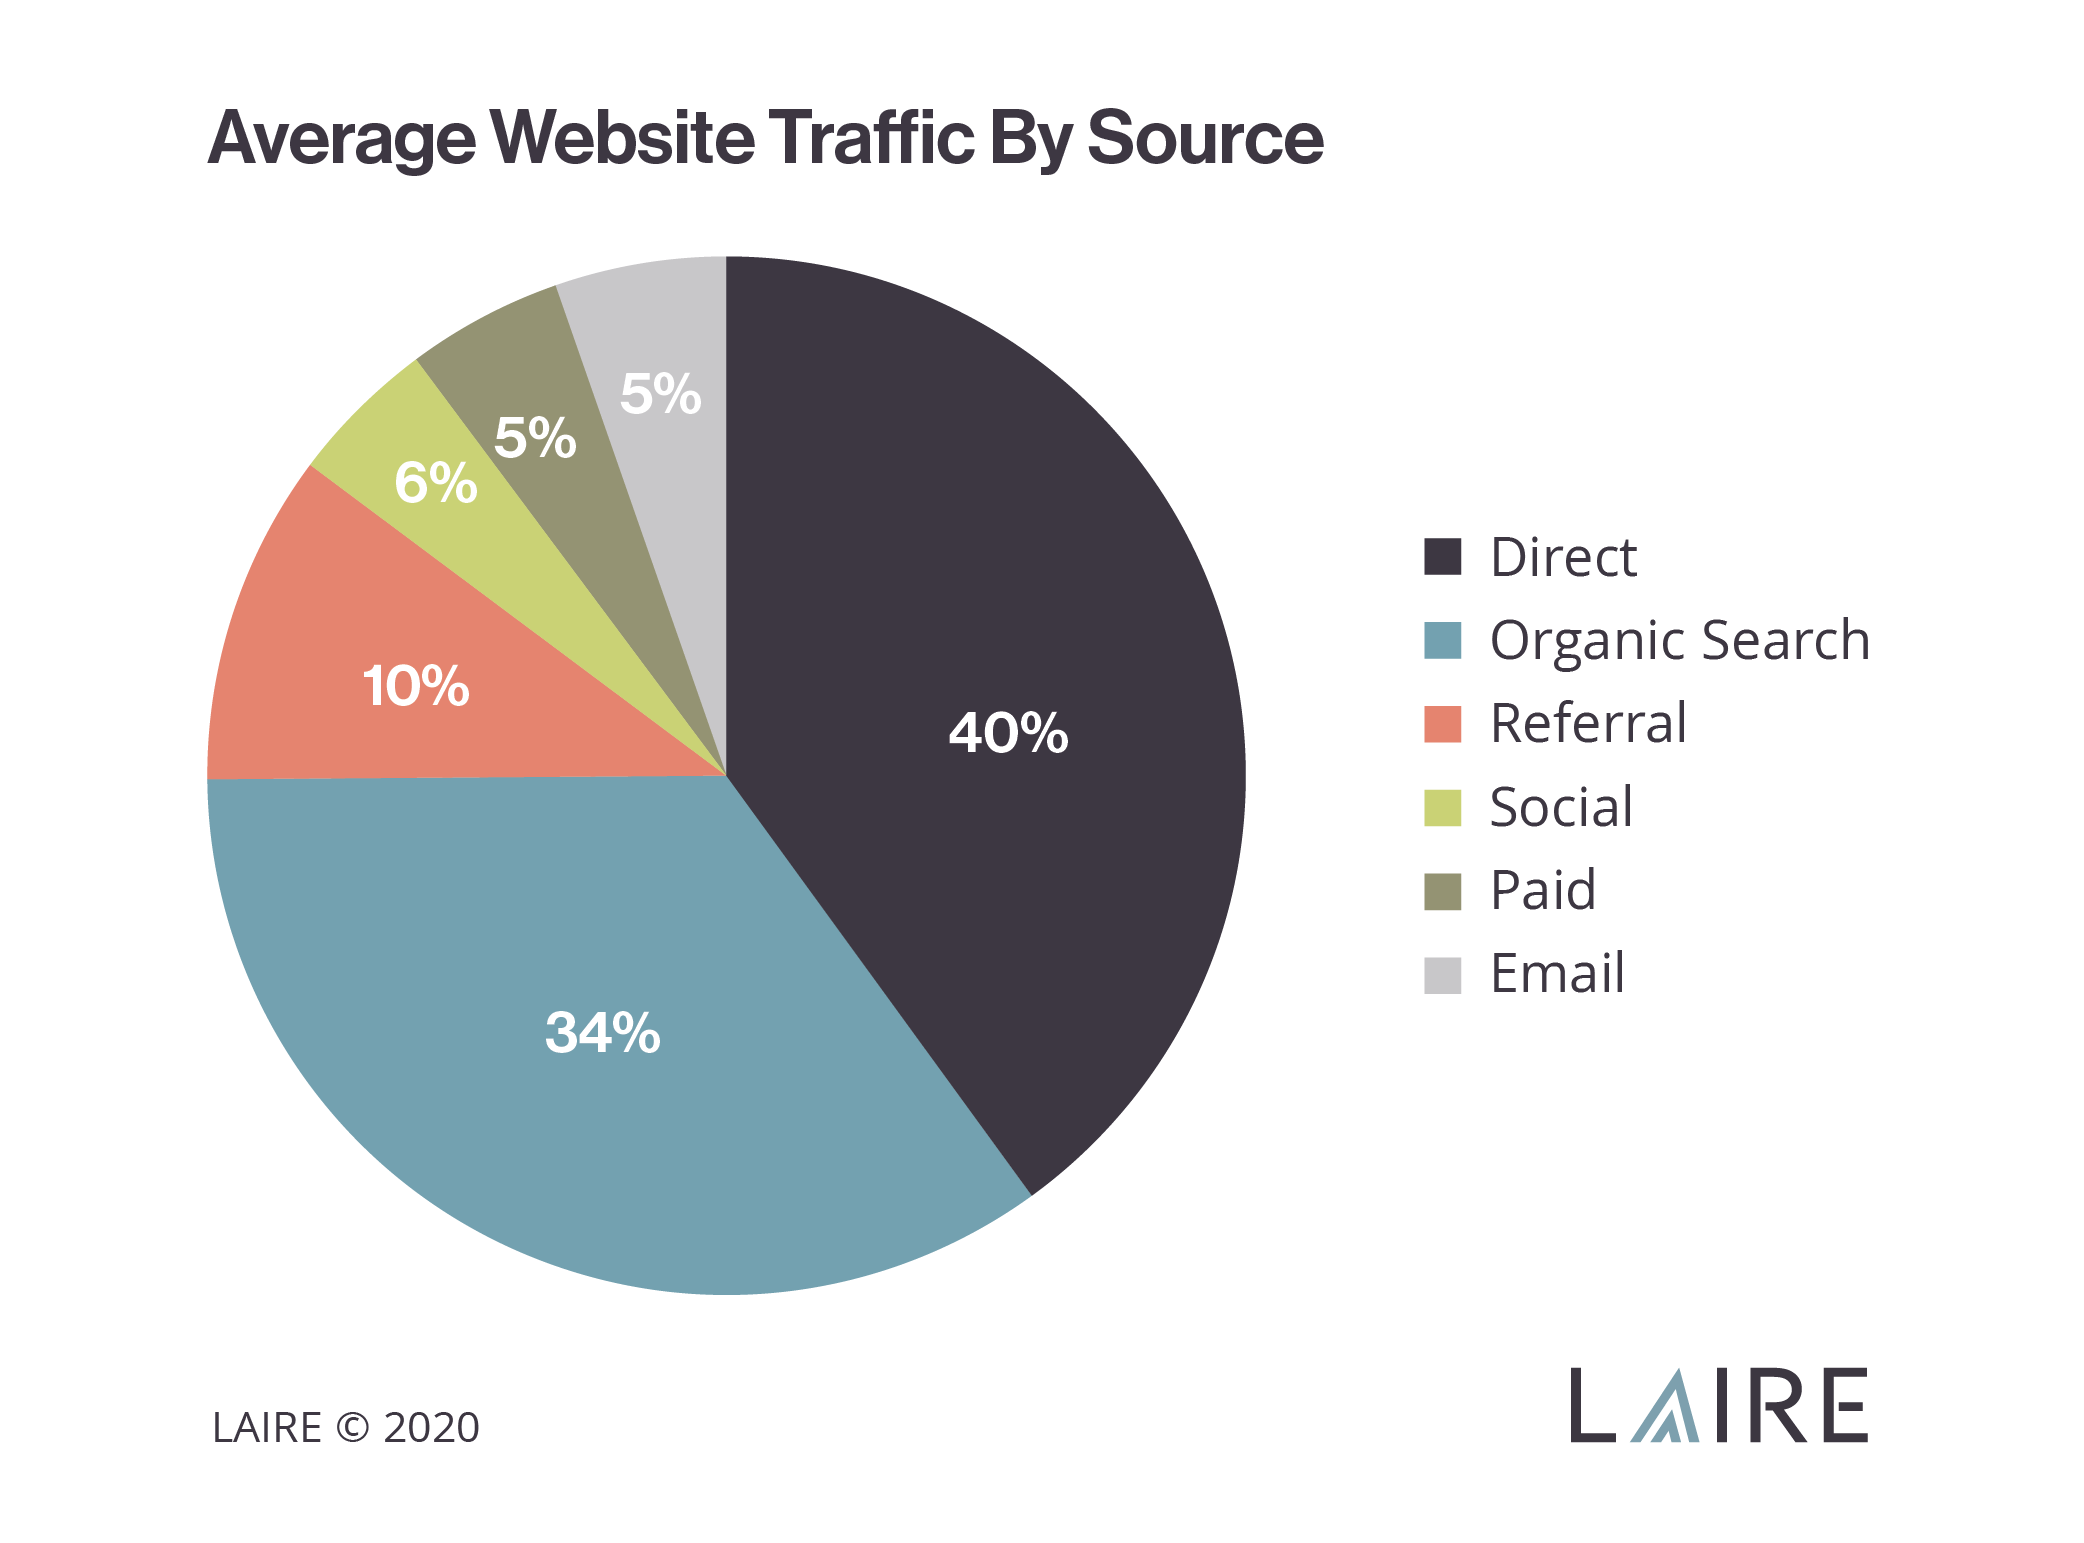 Website Traffic Sources Breakdown: What's the Difference?